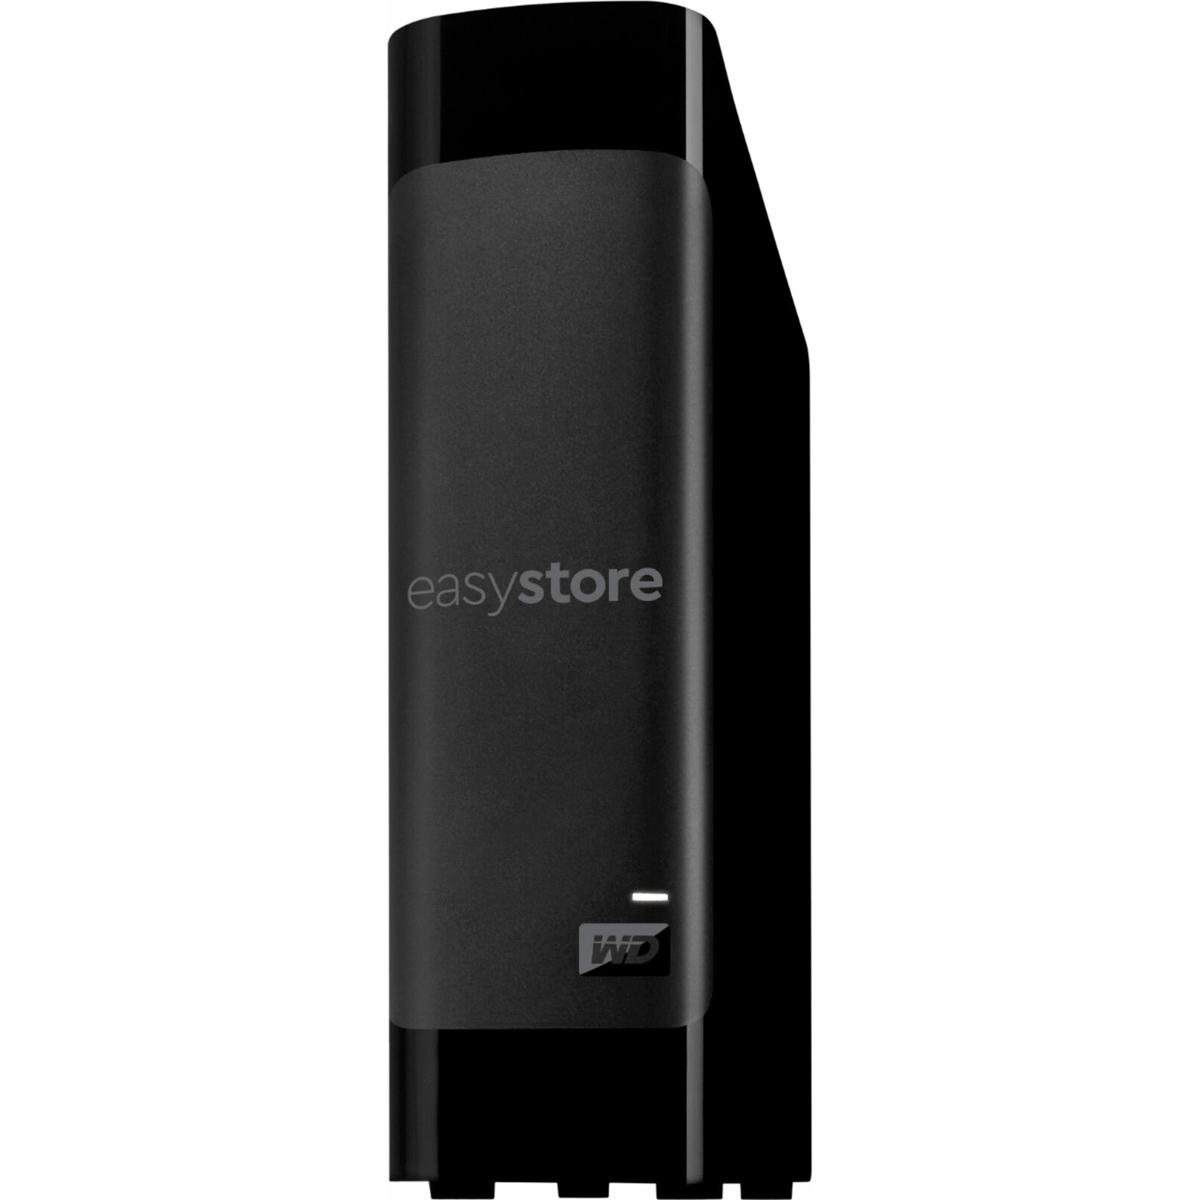 8TB WD easystore USB 3.0 External Hard Drive for $127.99 Shipped